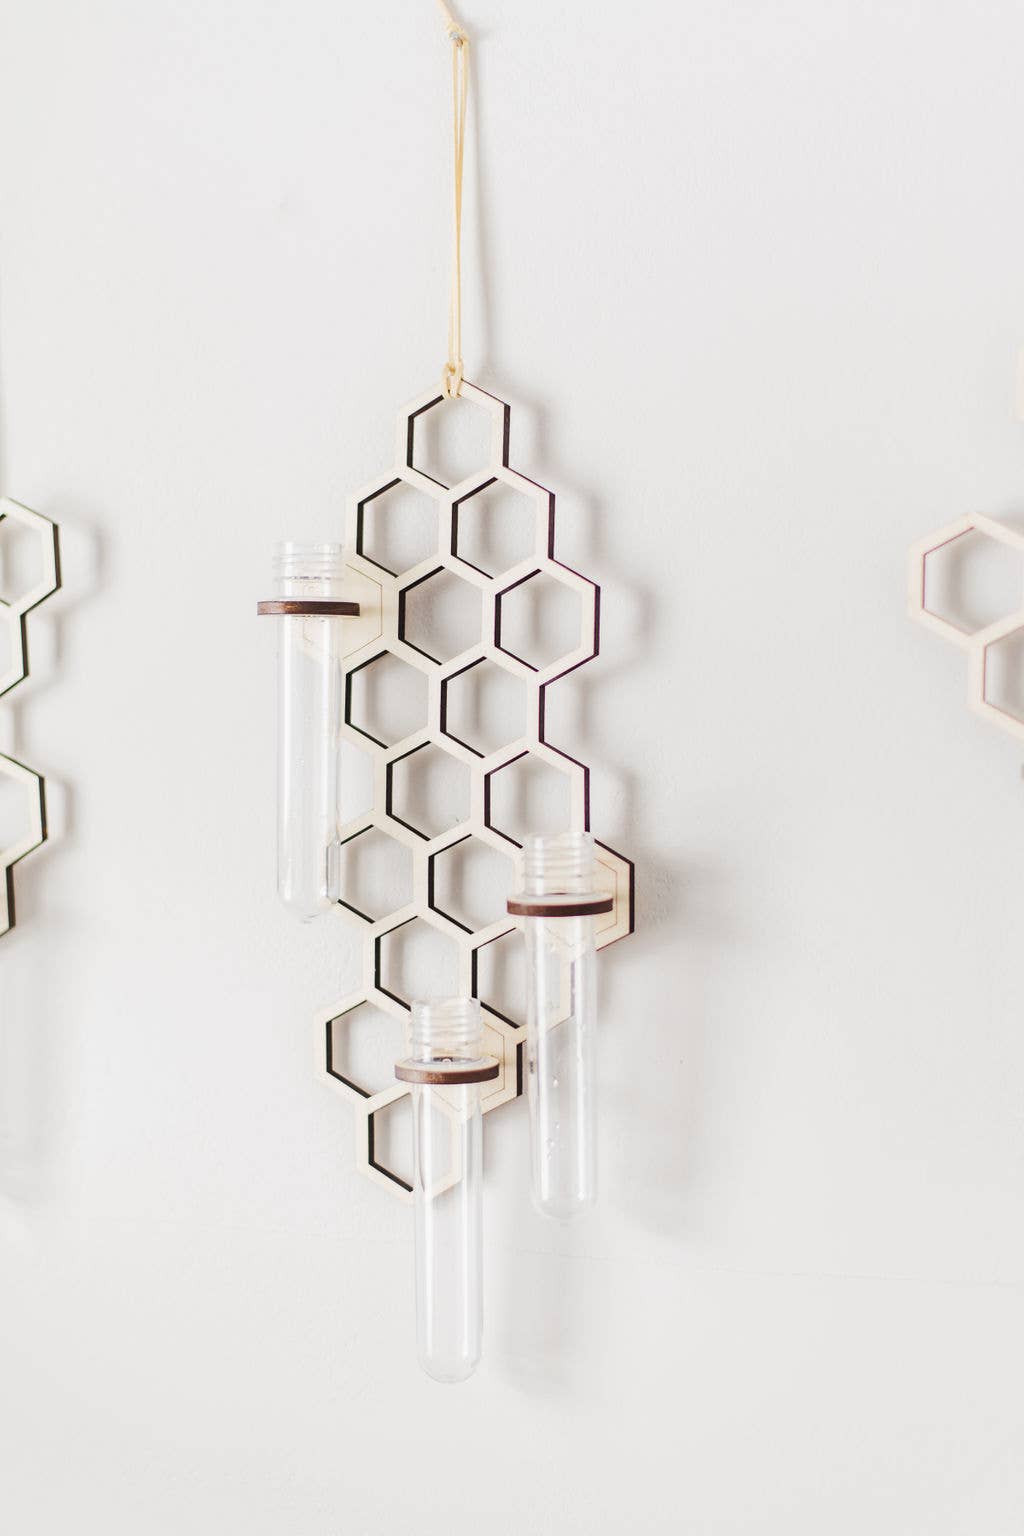 Hanging Propagation Station - Honeycomb Pattern with 3 Test Tubes